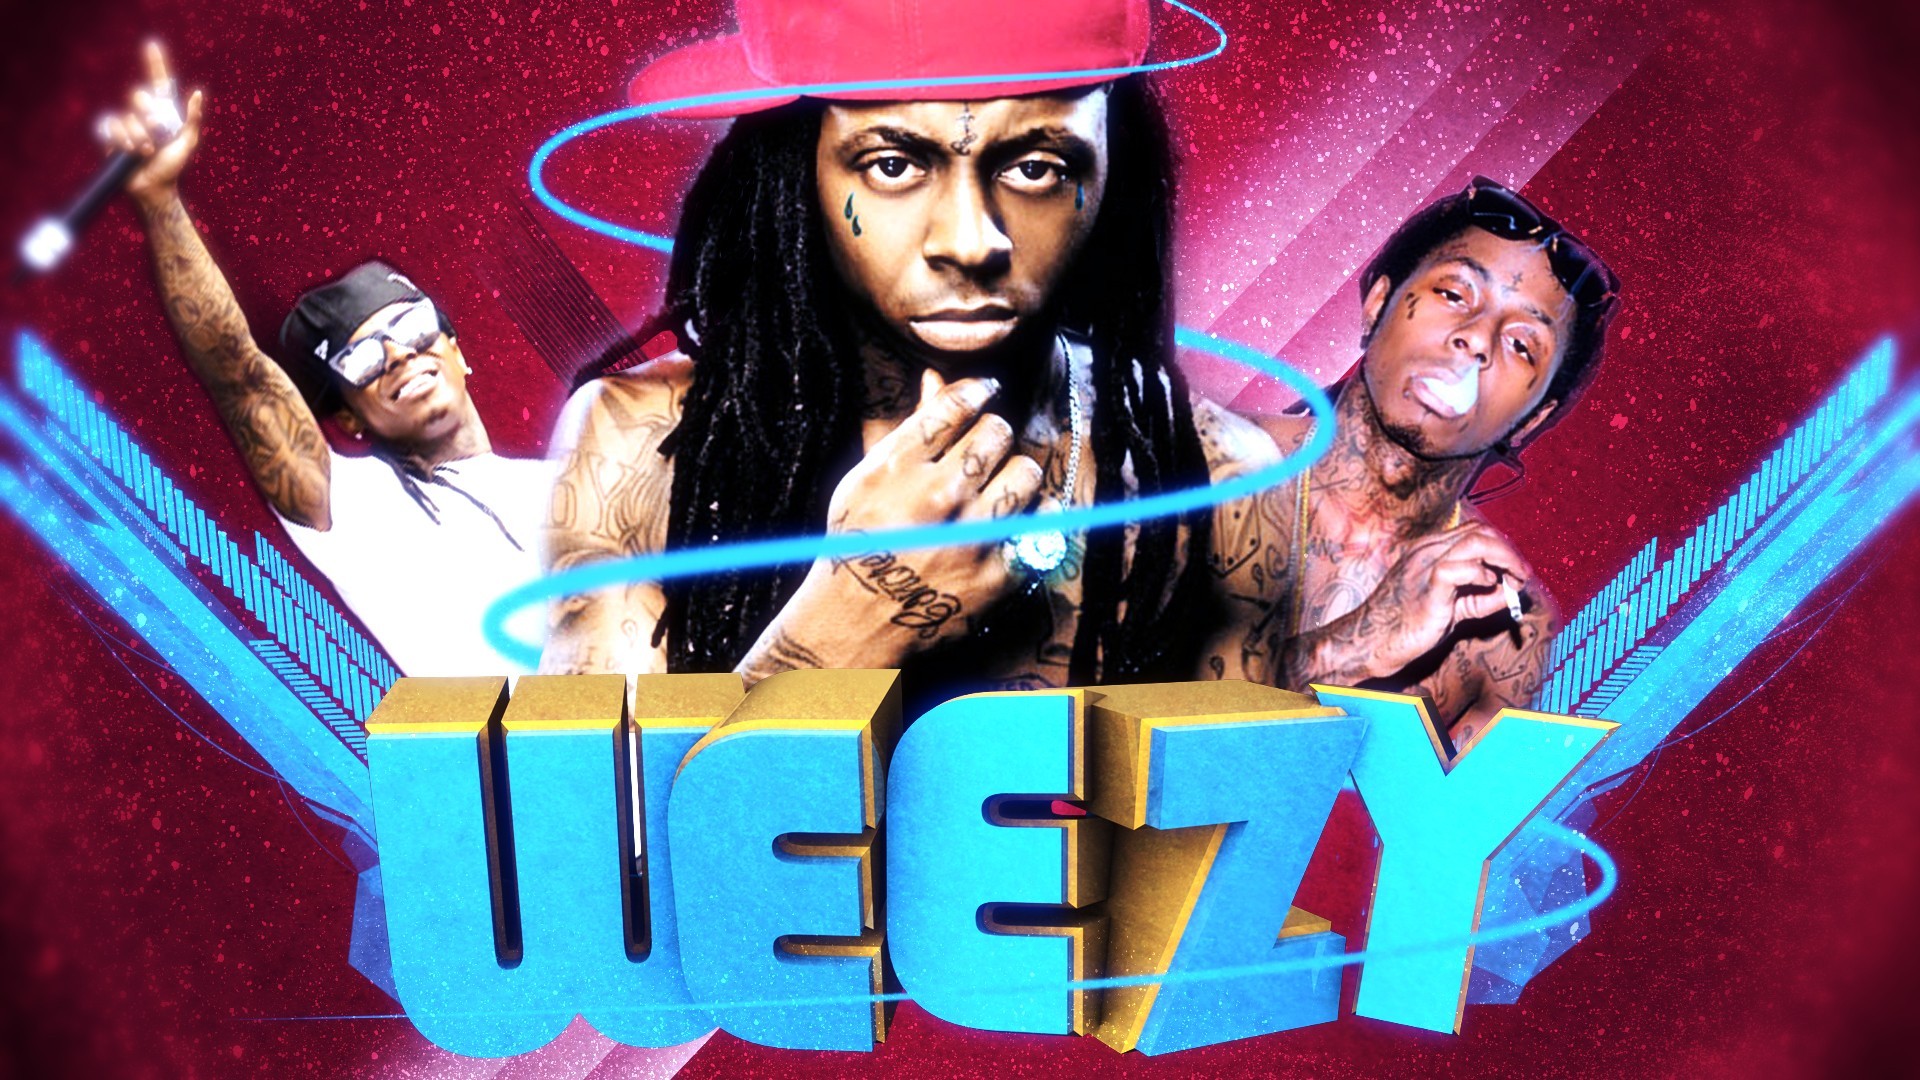 Download Lil Wayne HD 22 background for your phone iPhone android